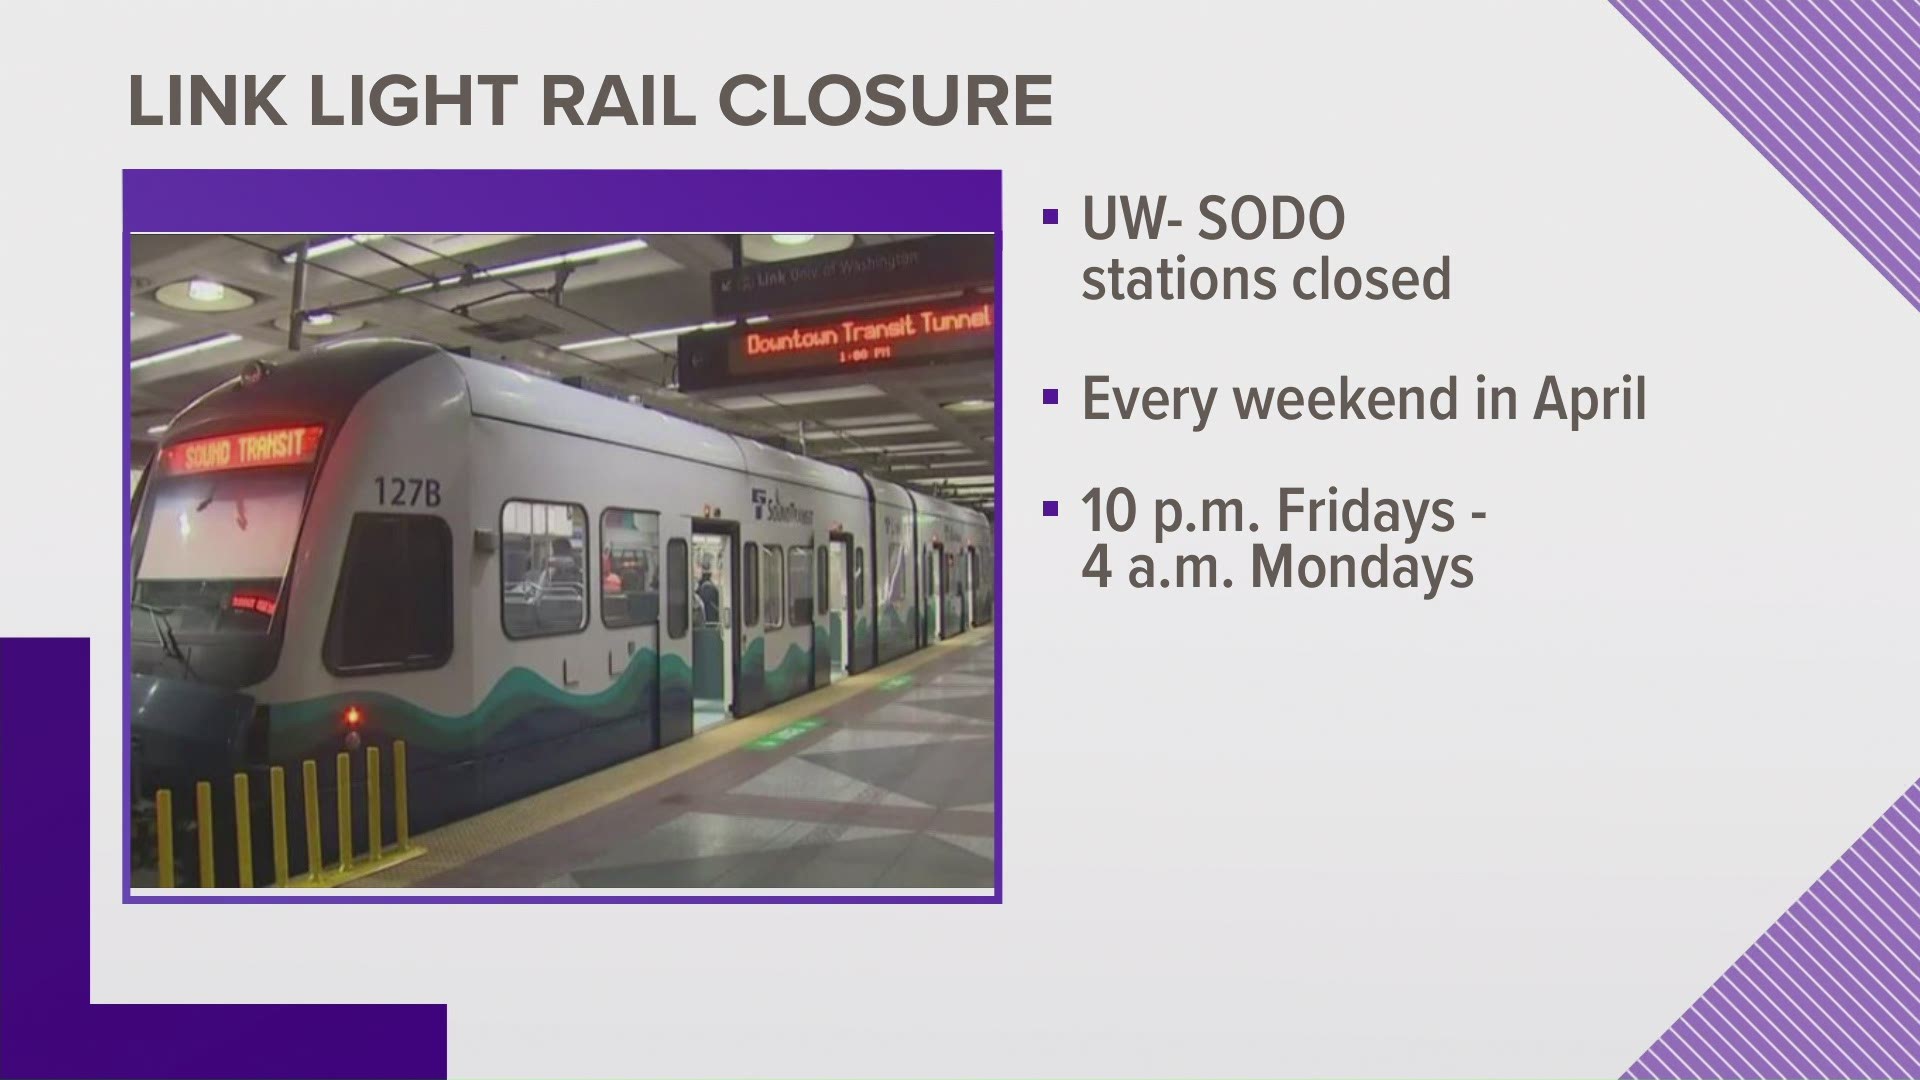 Crews will work to connect the East Link systems during the closure. Link shuttle buses will make surface stops at the closed stations between SODO and UW.